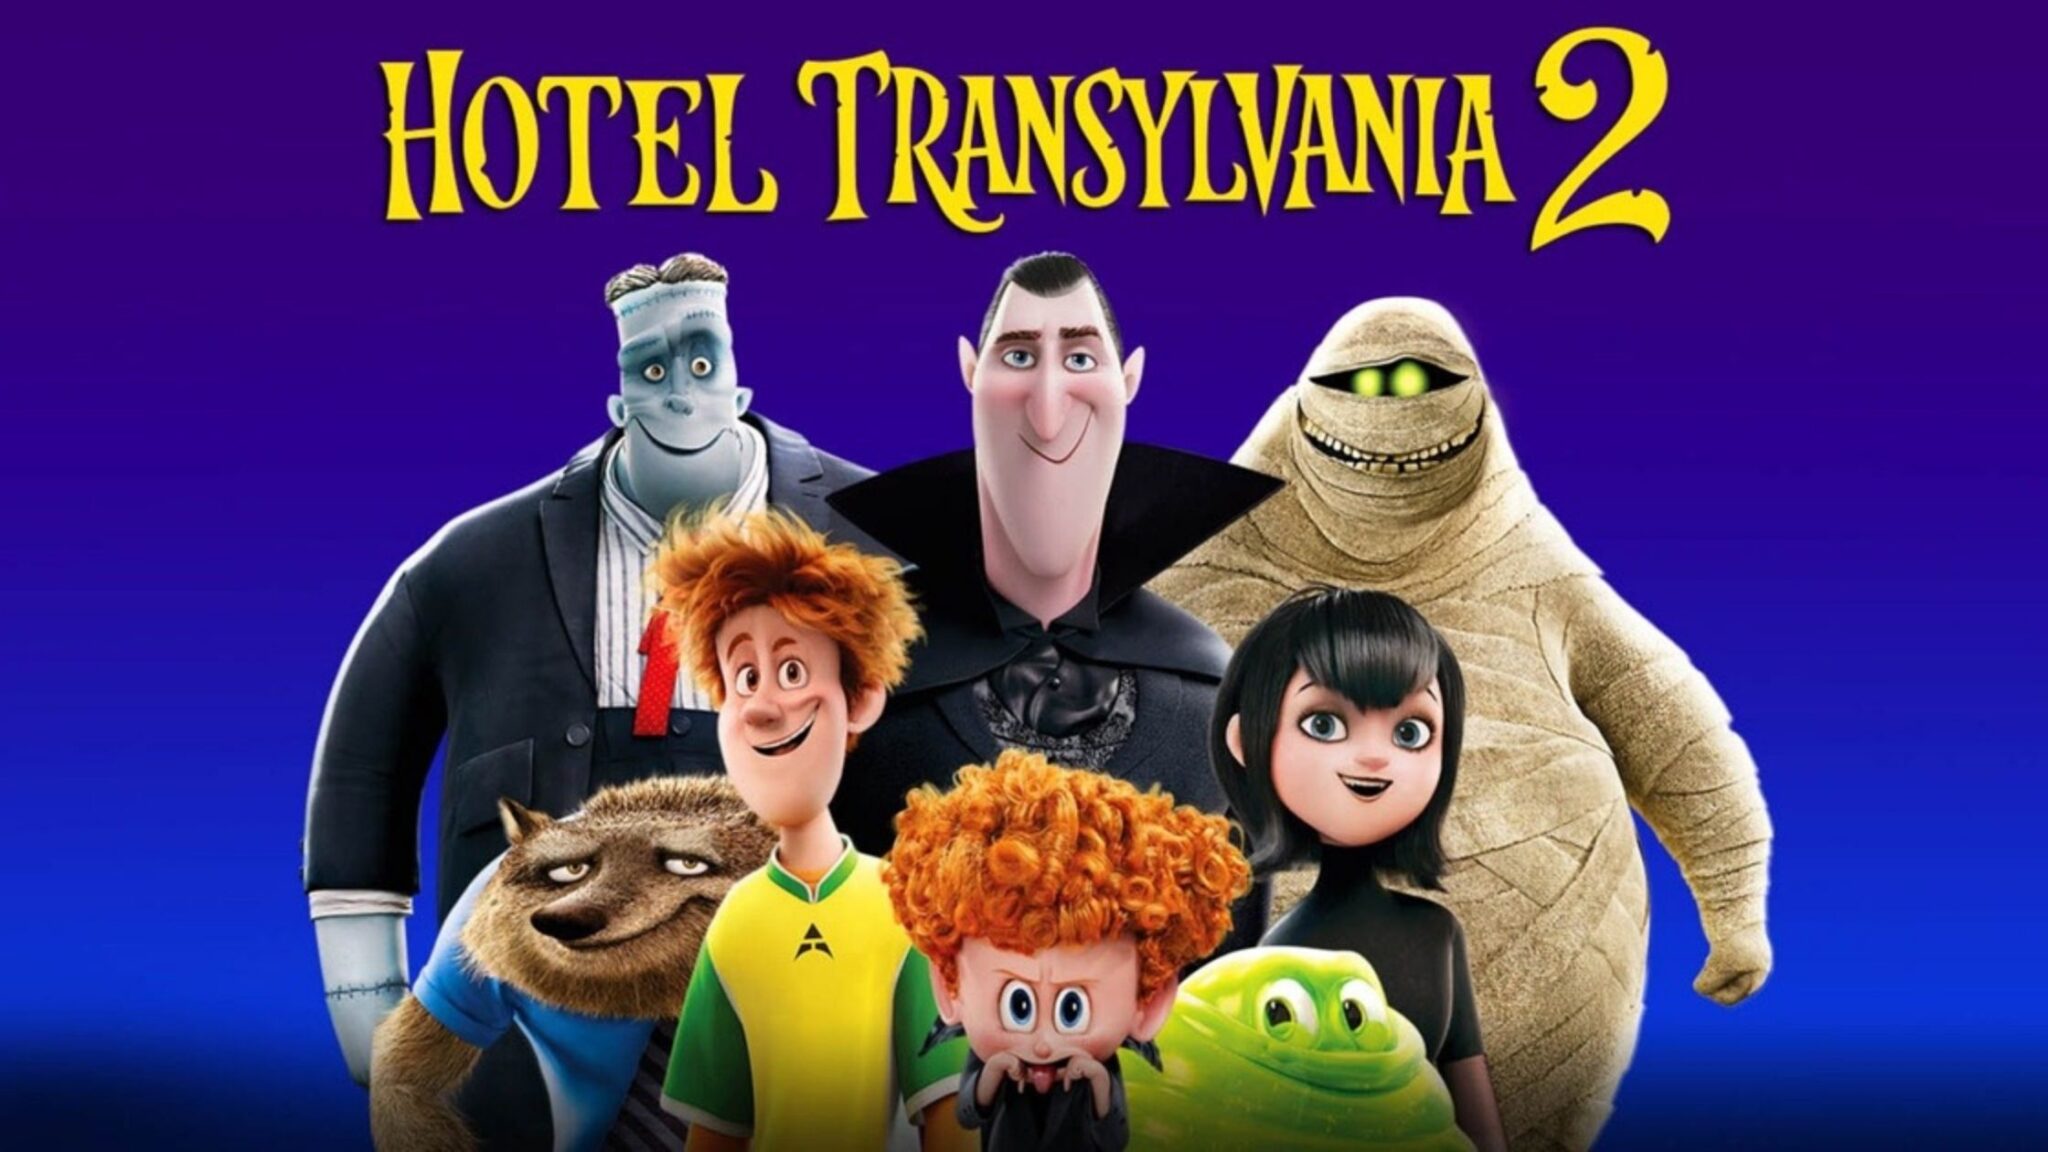 Watch Hotel Transylvania 2 (2015) on Netflix From Anywhere in the World